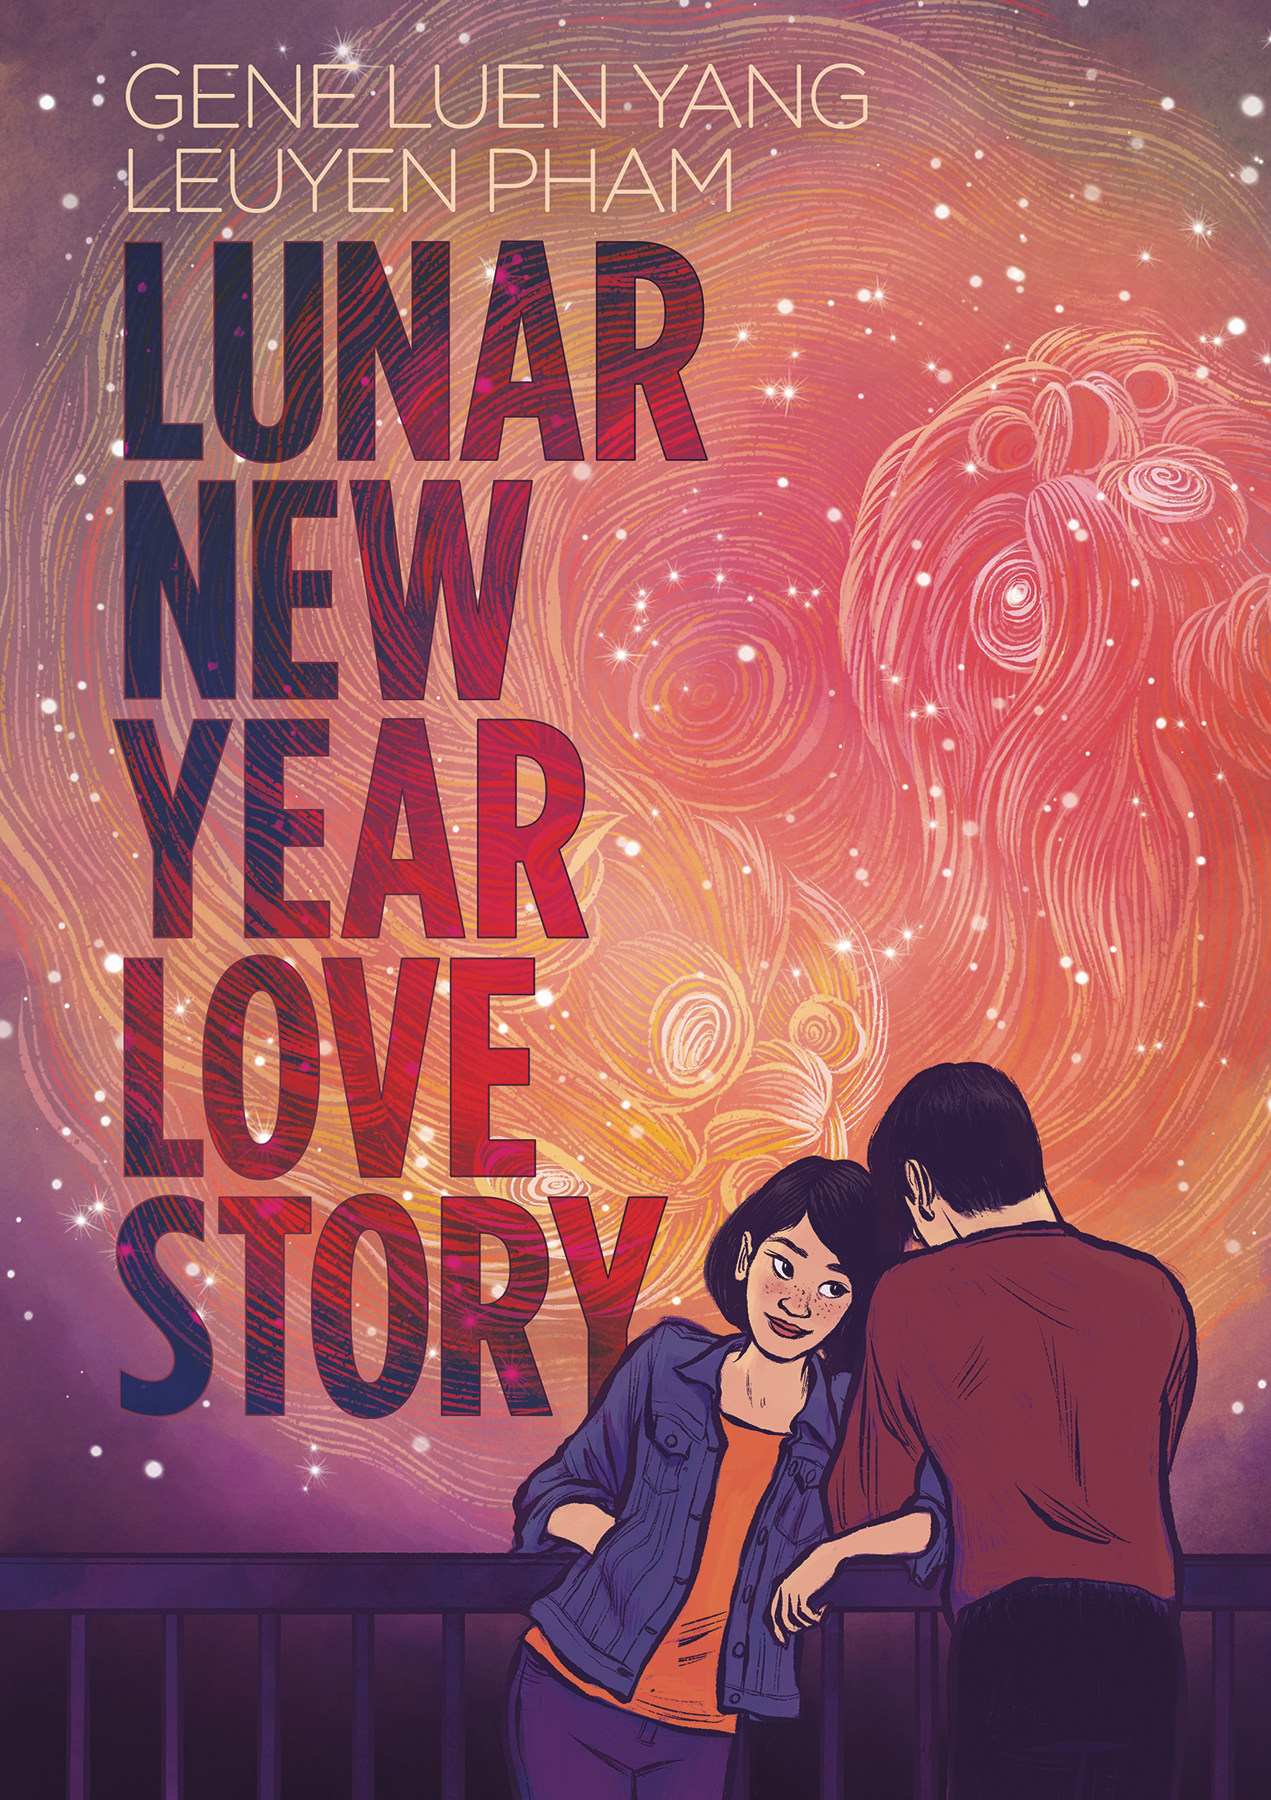 Lunar New Year Love Story Graphic Novel